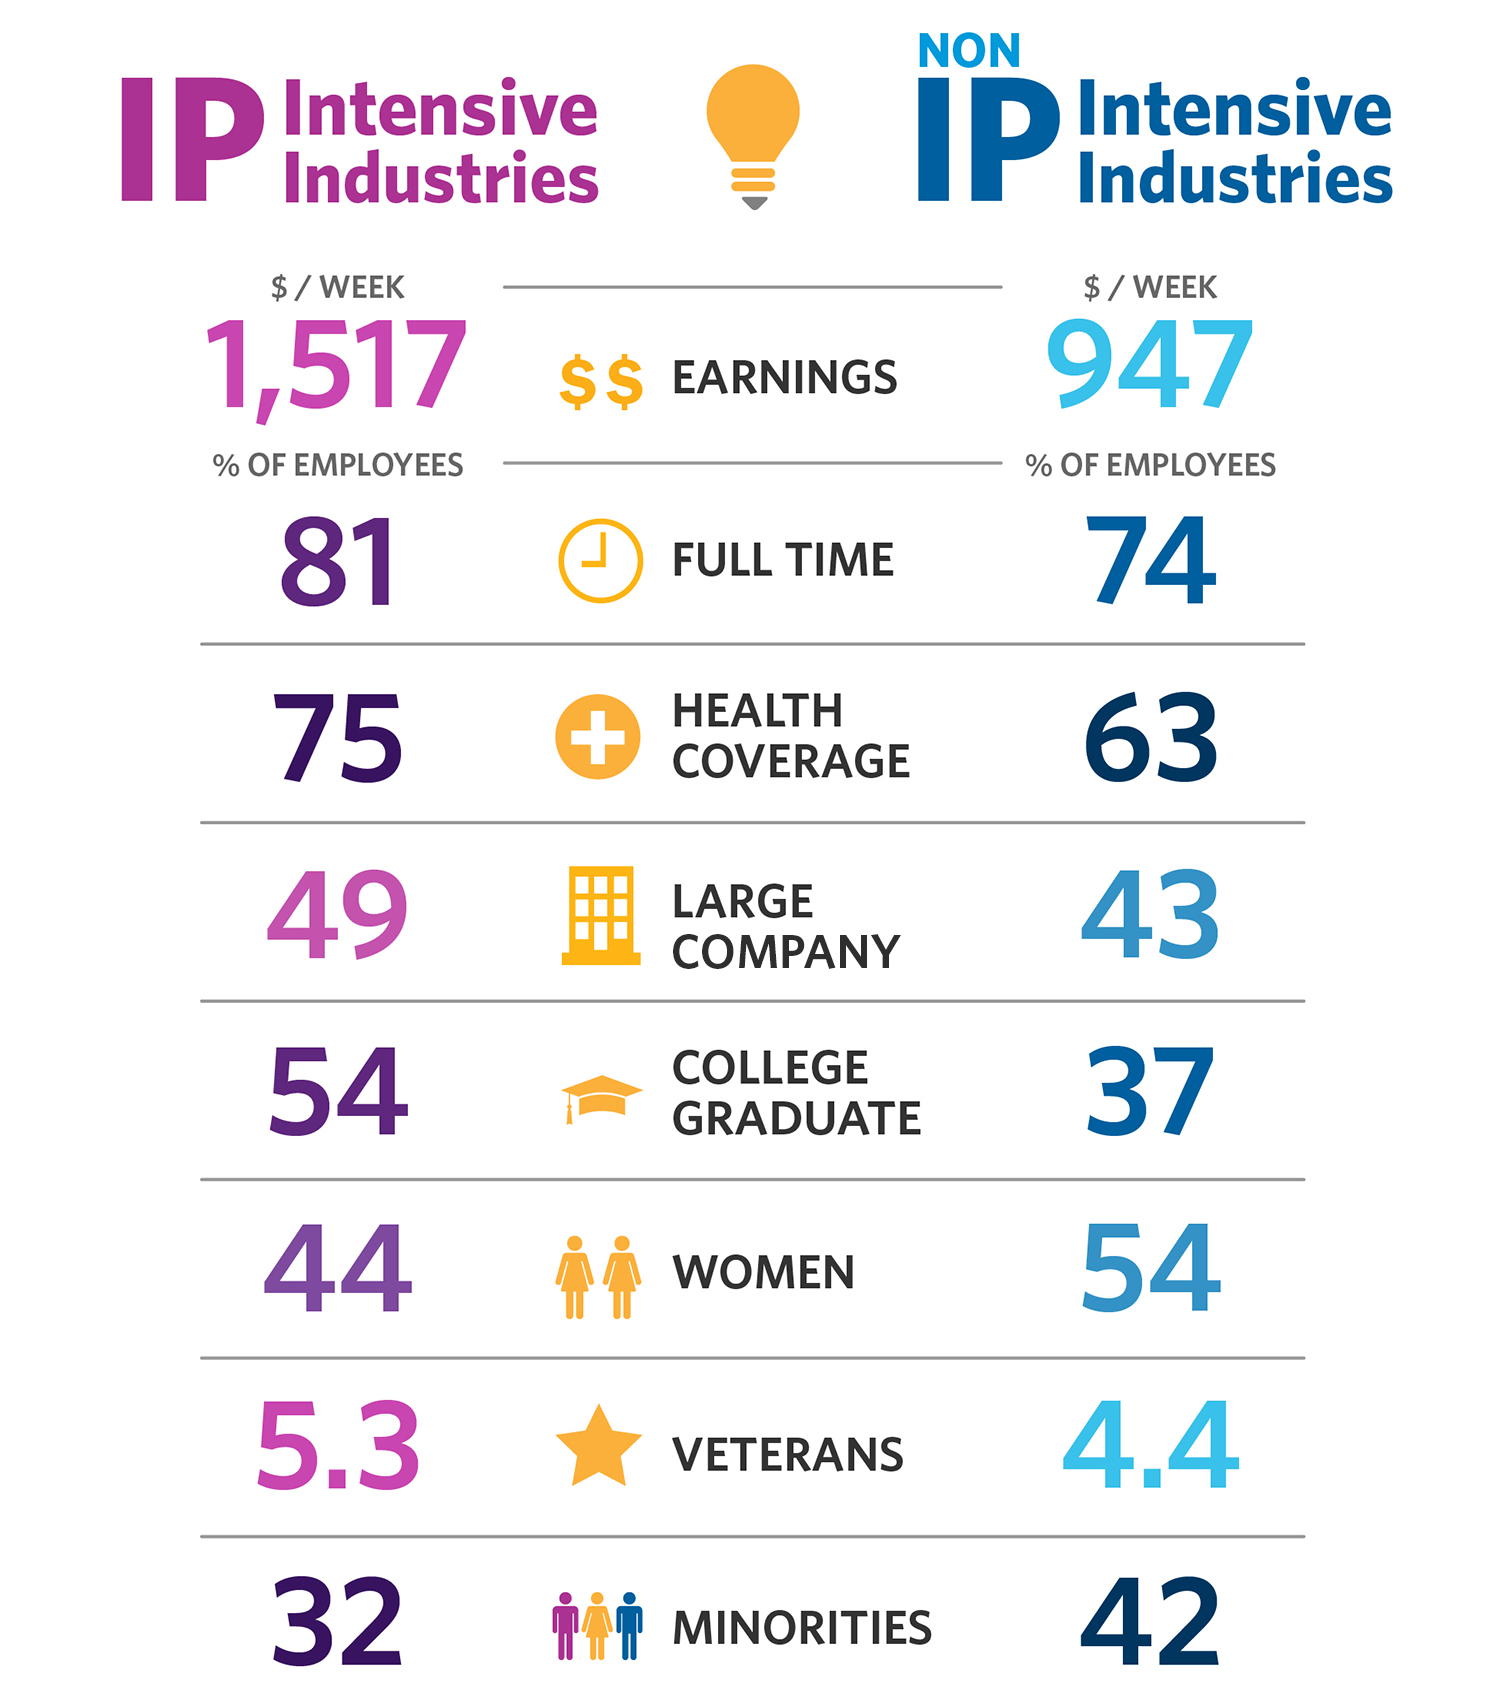 Infographic on workers in the IP intensive industries versus non-IP intensive industries.